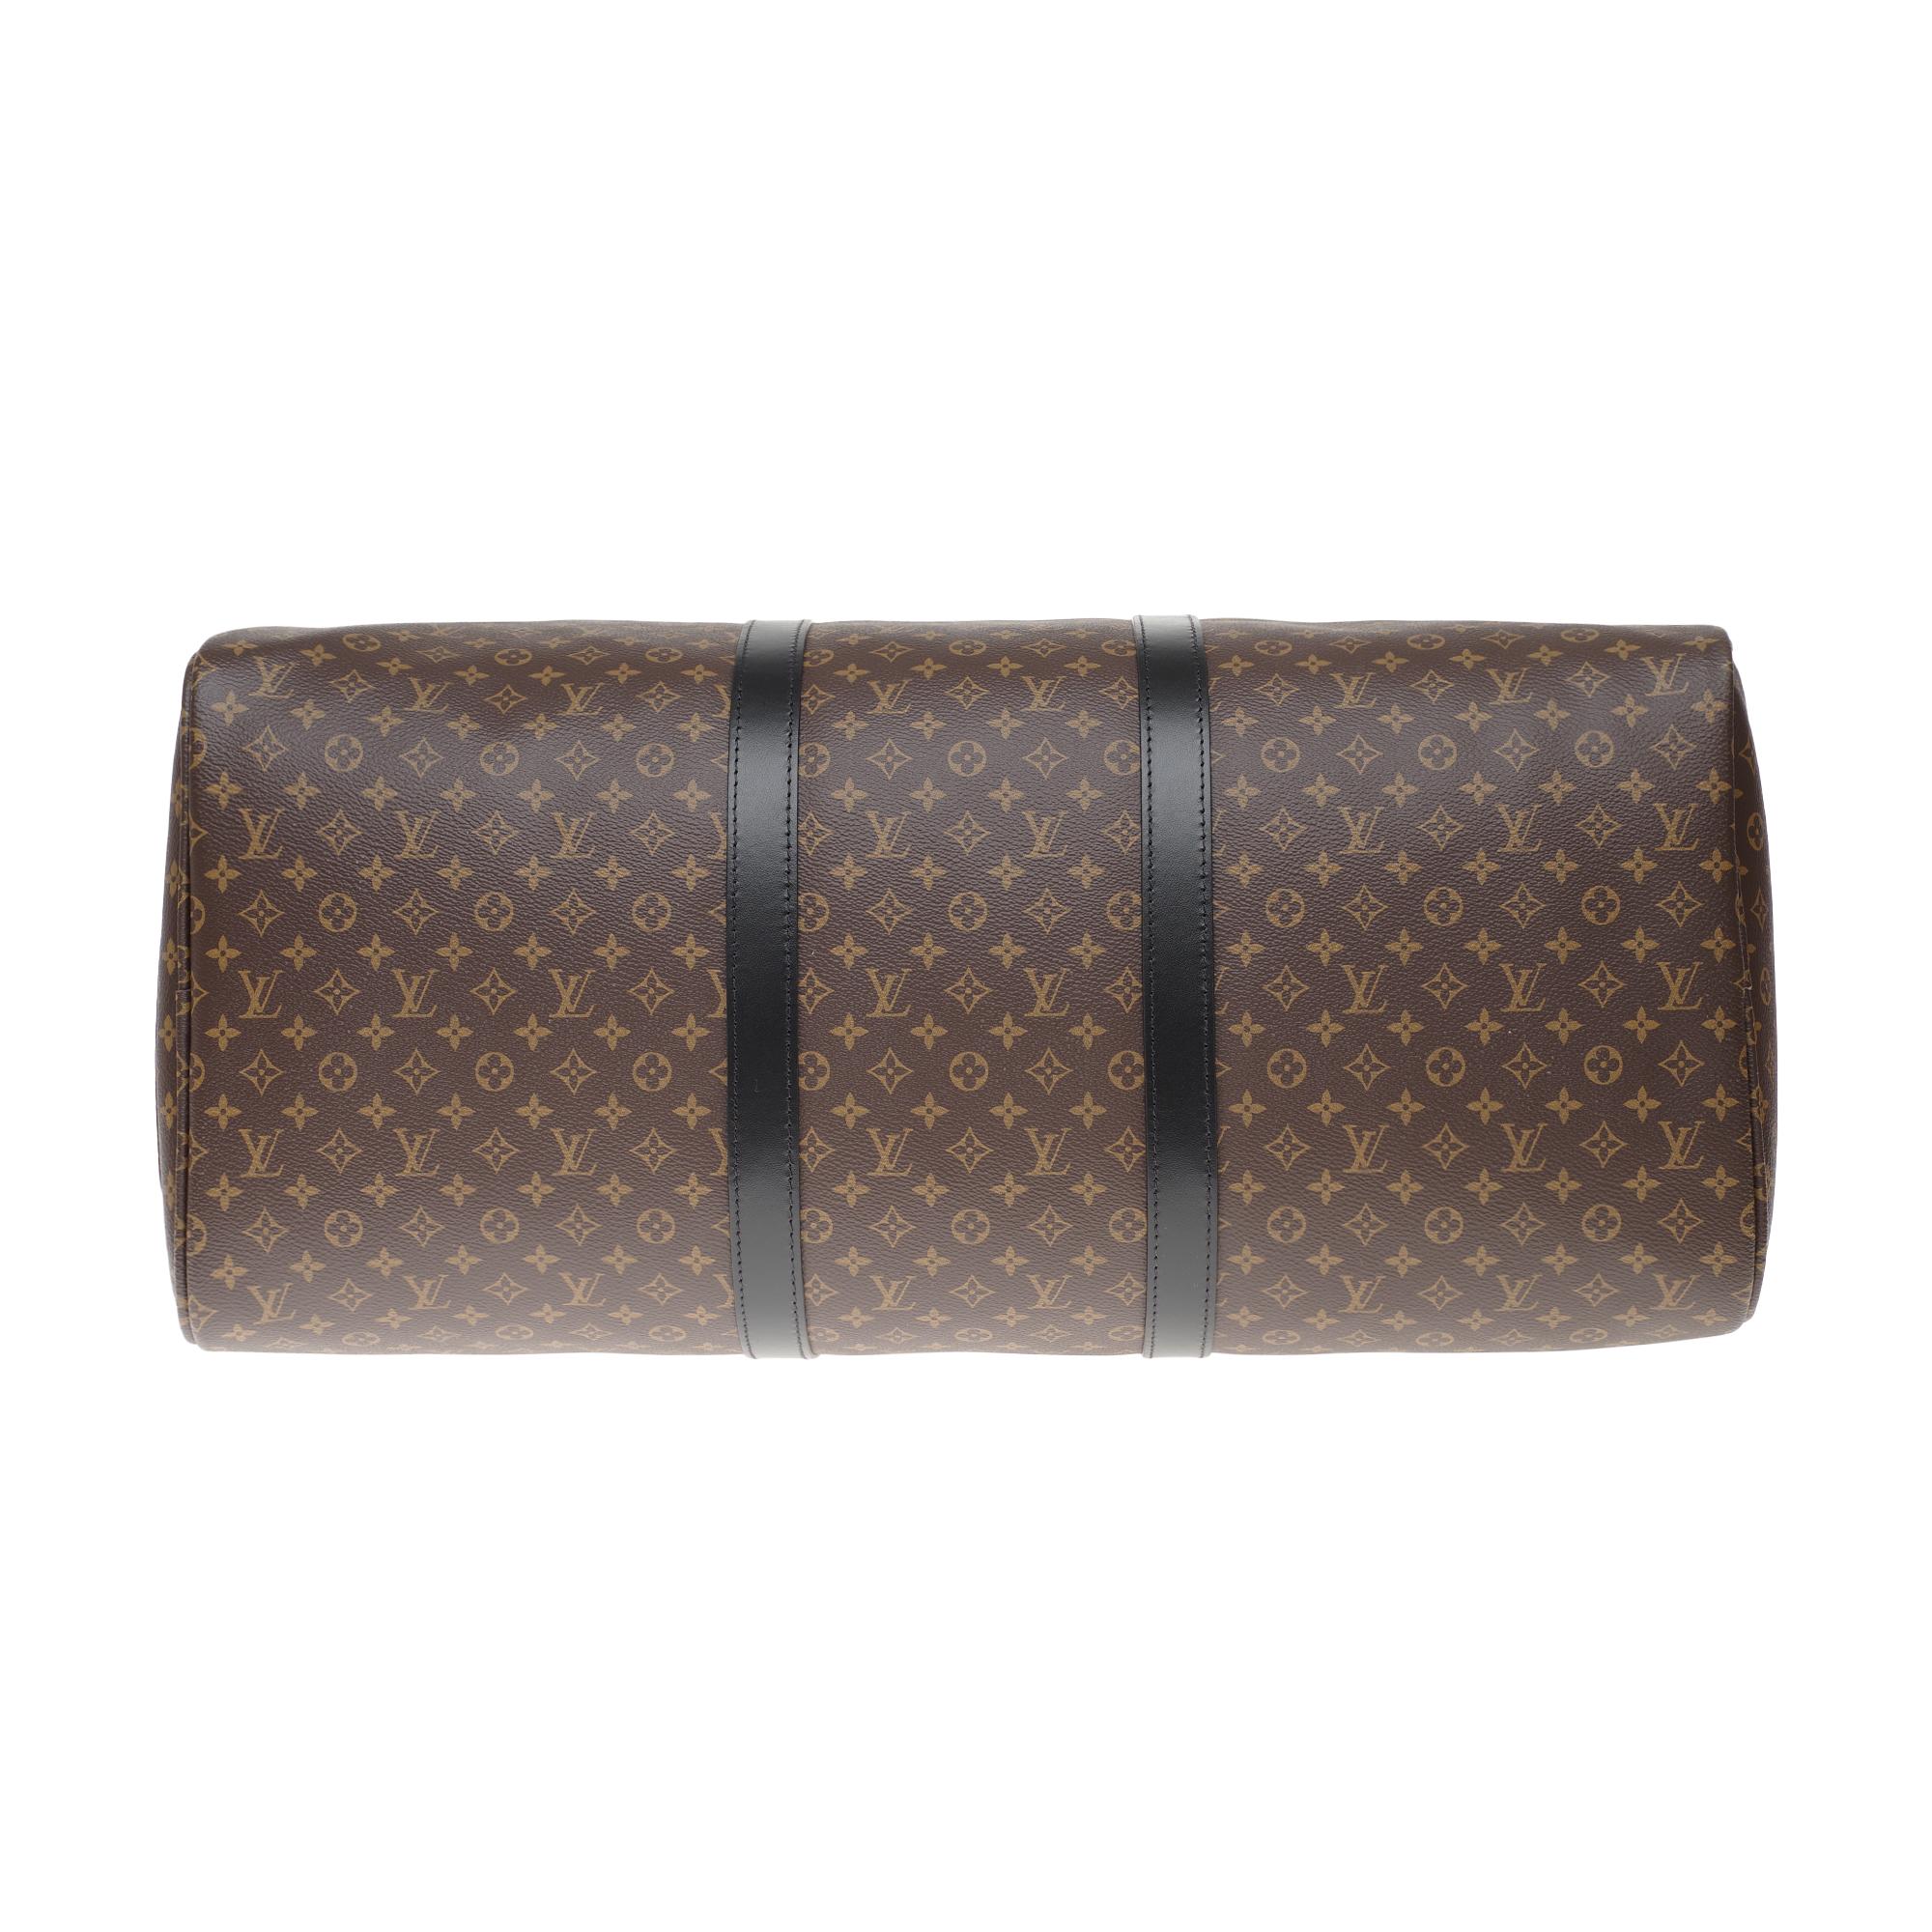 ULTRA EXCLUSIVE-BRAND NEW-LV Keepall 50 strap 